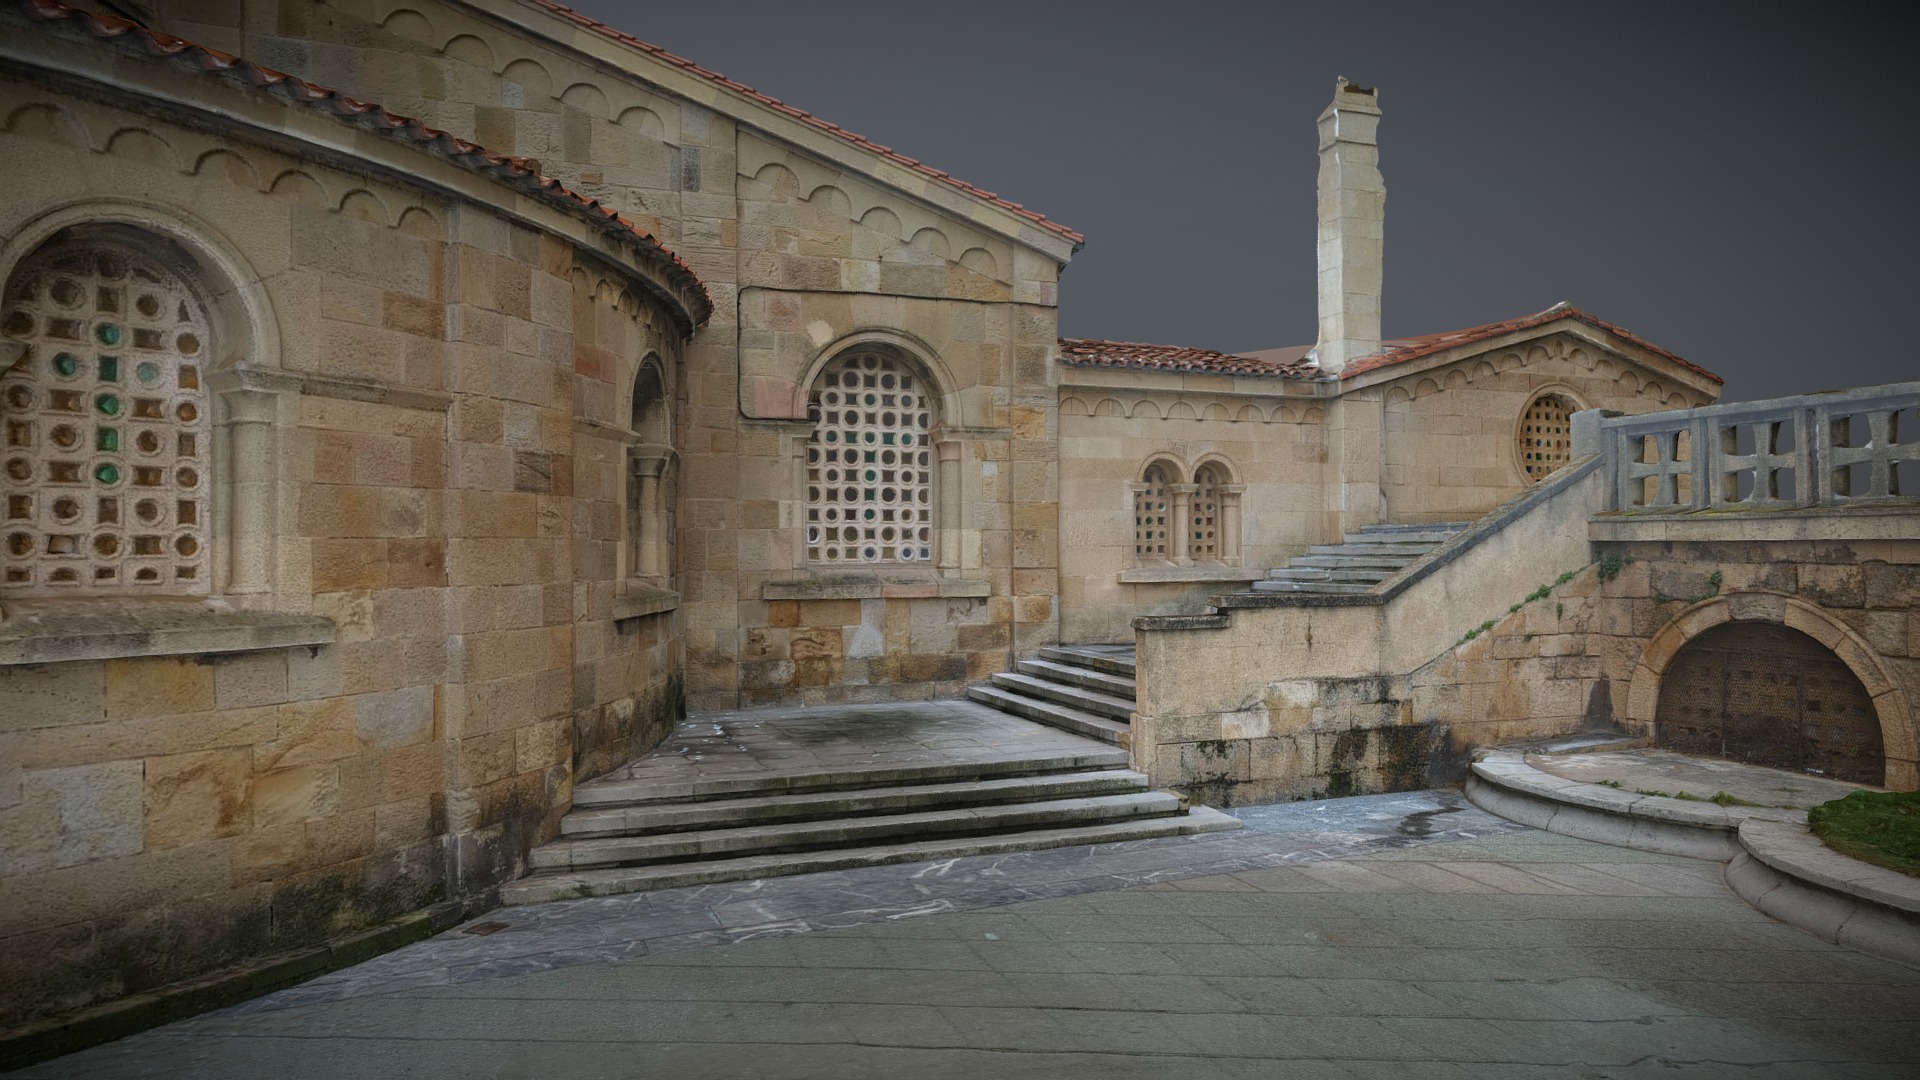 3D model Stairs behind church photogrammetry scan - This is a 3D model of the Stairs behind church photogrammetry scan. The 3D model is about a stone building with a stone walkway.